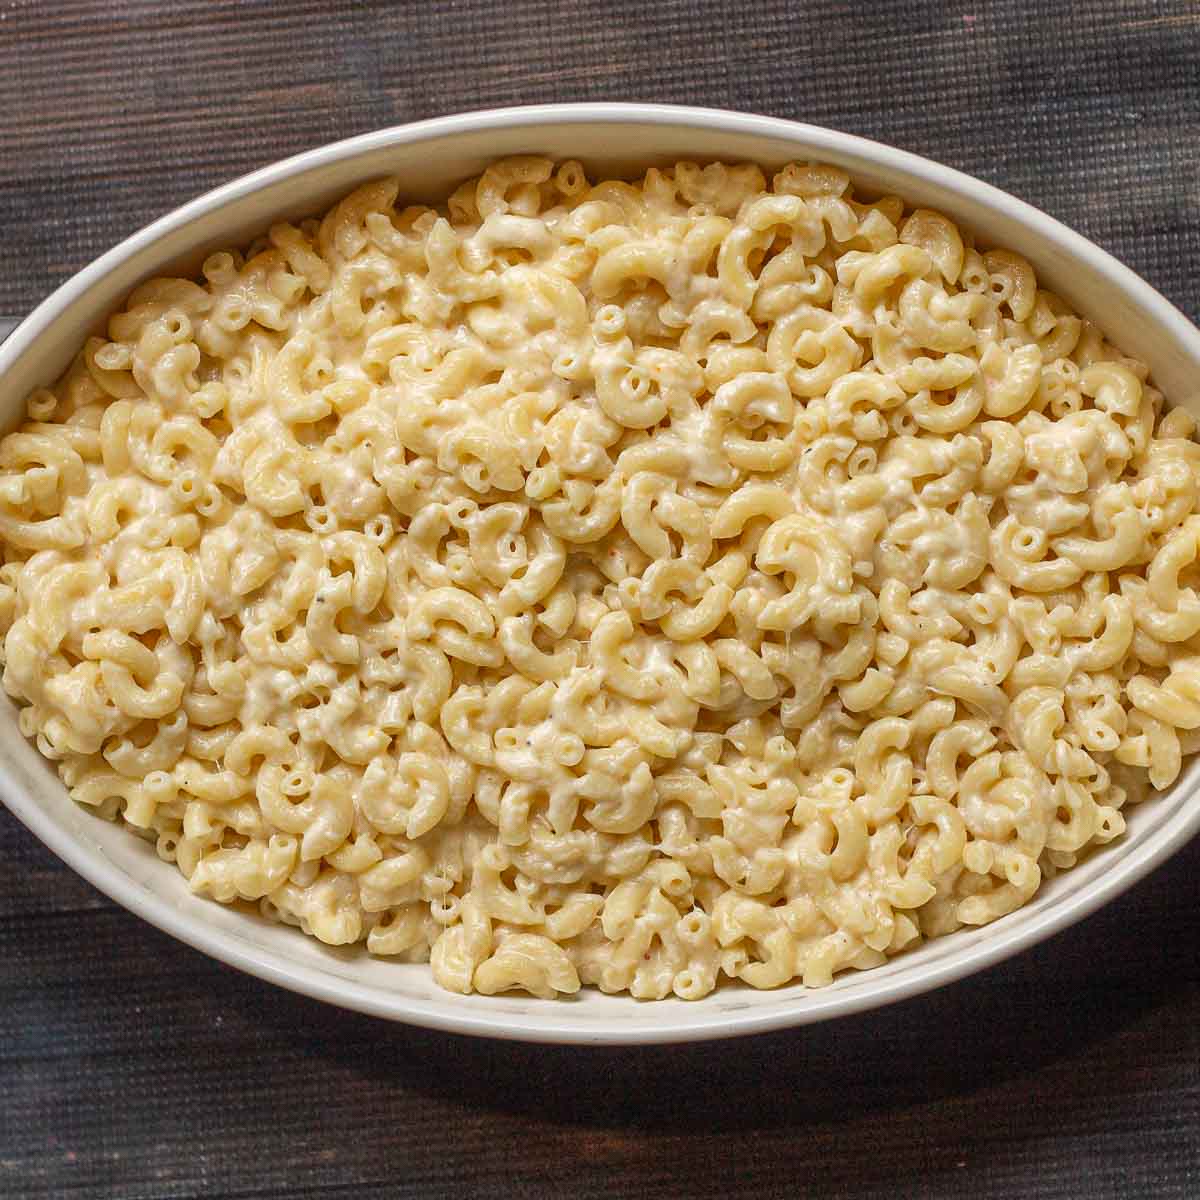 Leftover macaroni and cheese in an oval dish.